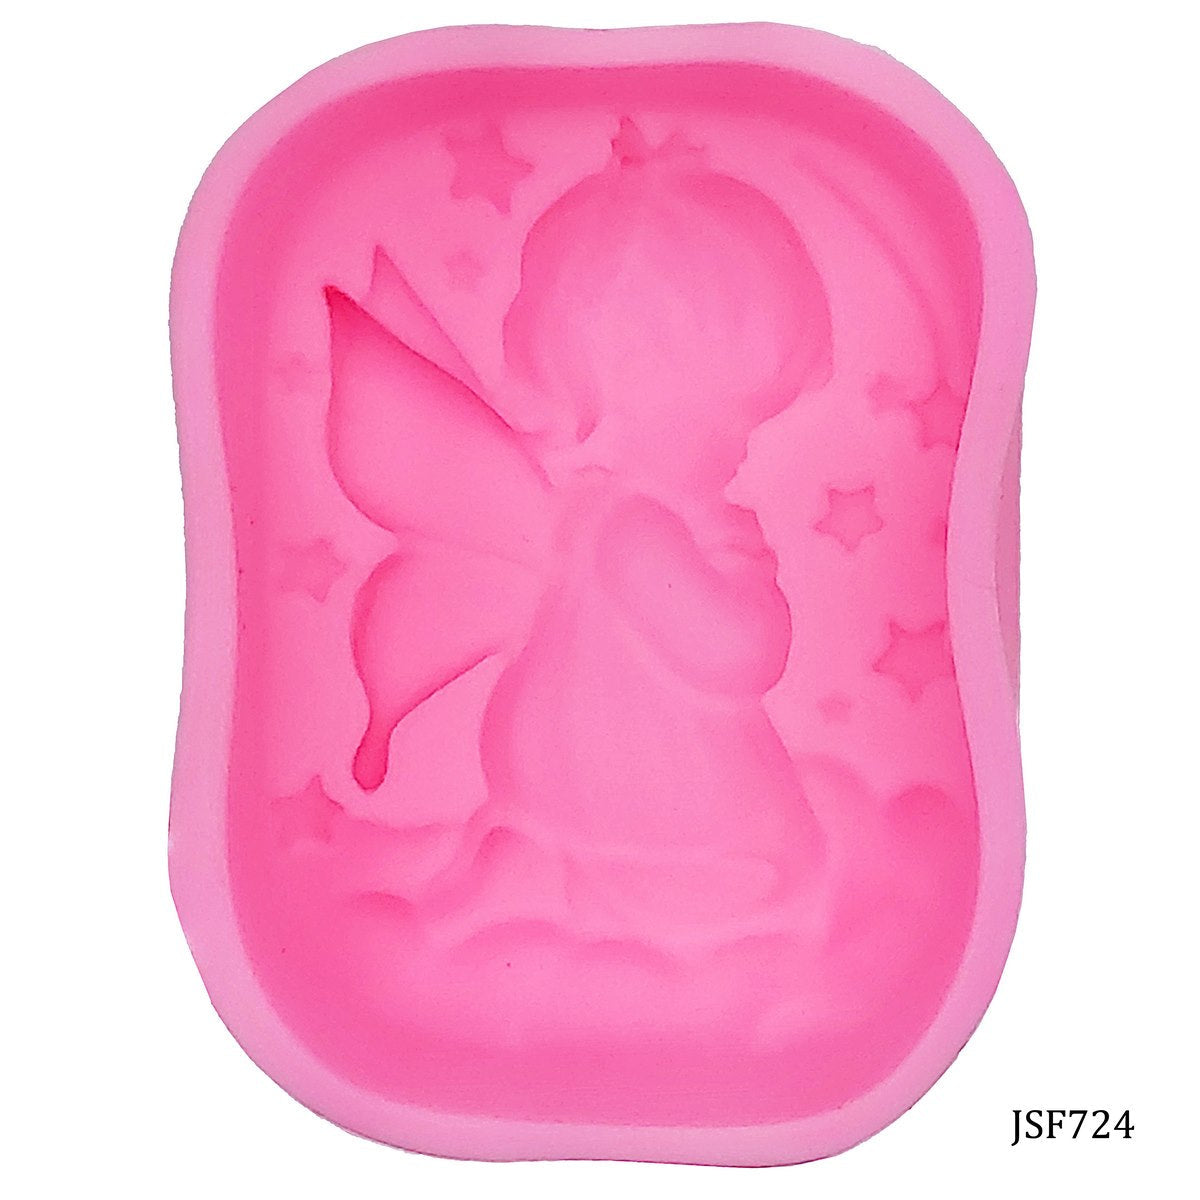 jags-mumbai Mould Silicone mould for resin, cakes, soaps and candles, Silicone Mould Baby Fairy Tale JSF724